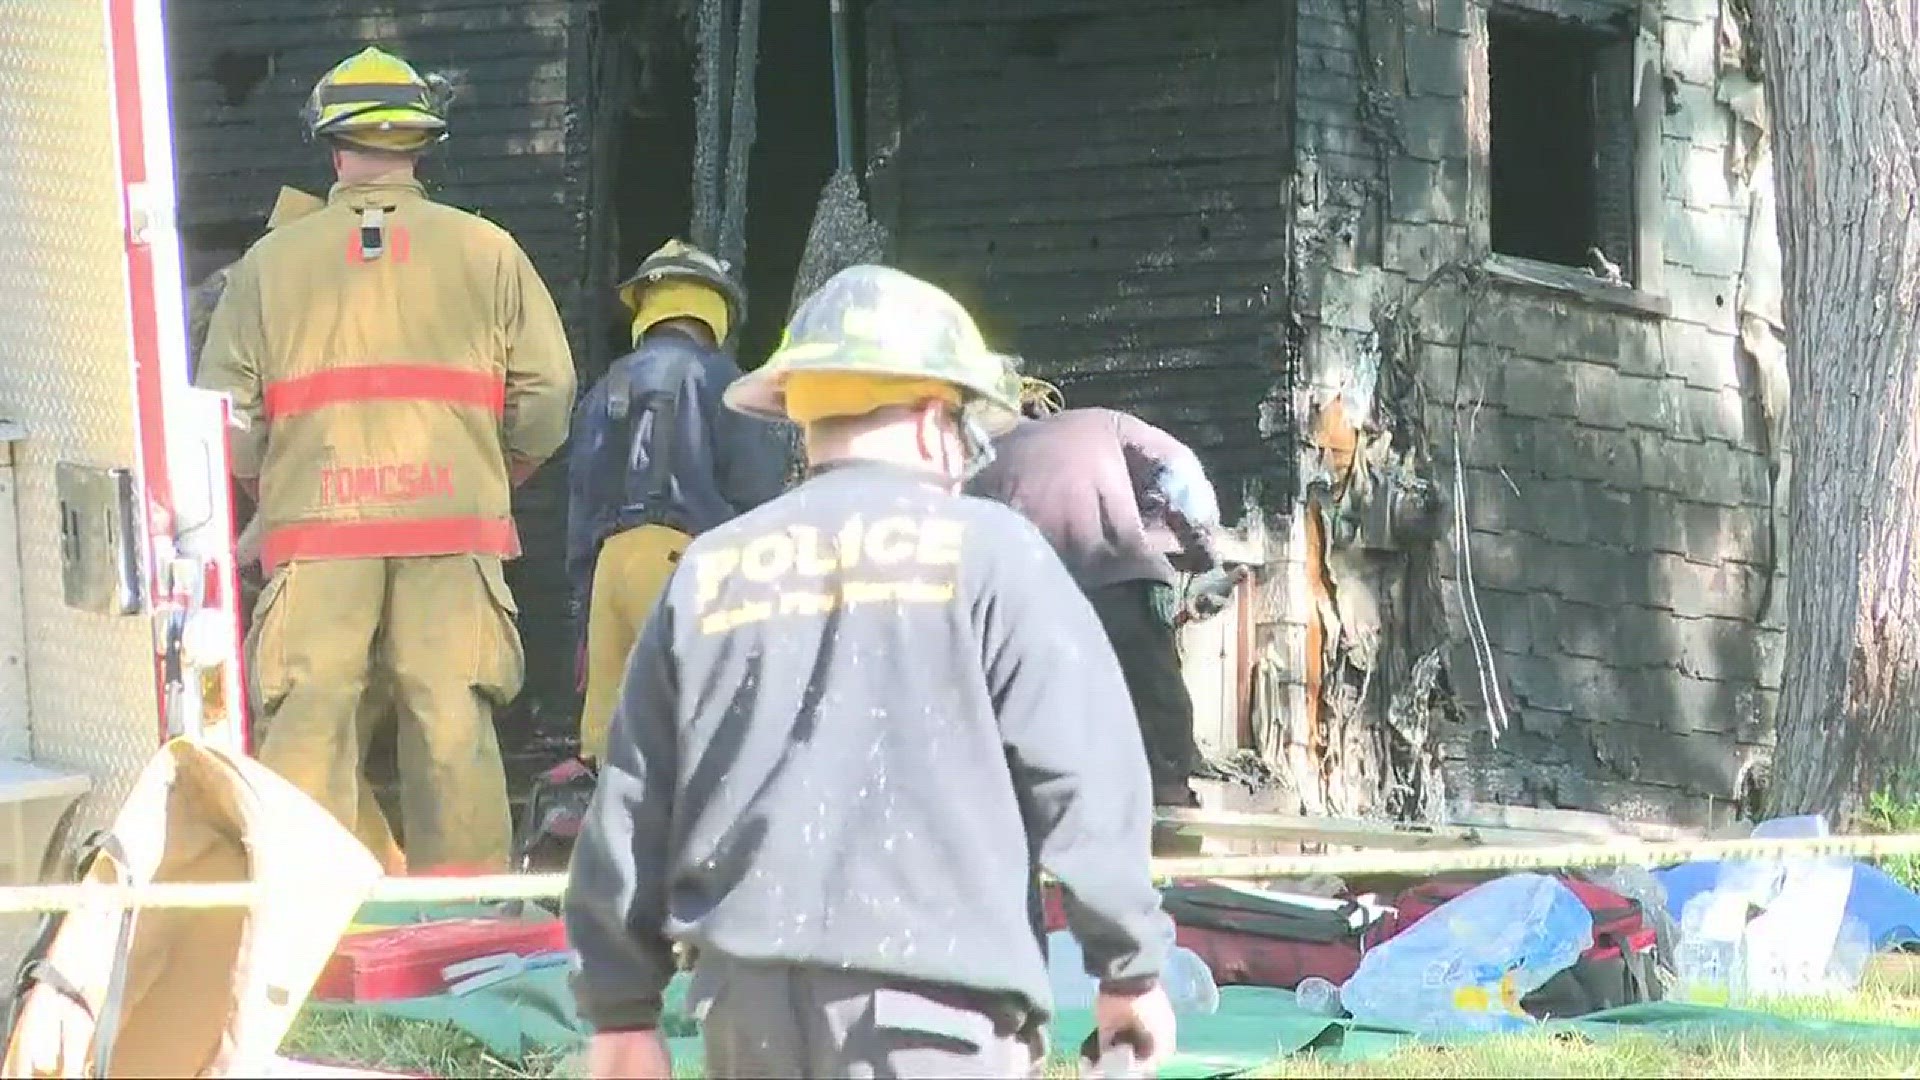 The latest on the Akron house fire that claimed 7 lives